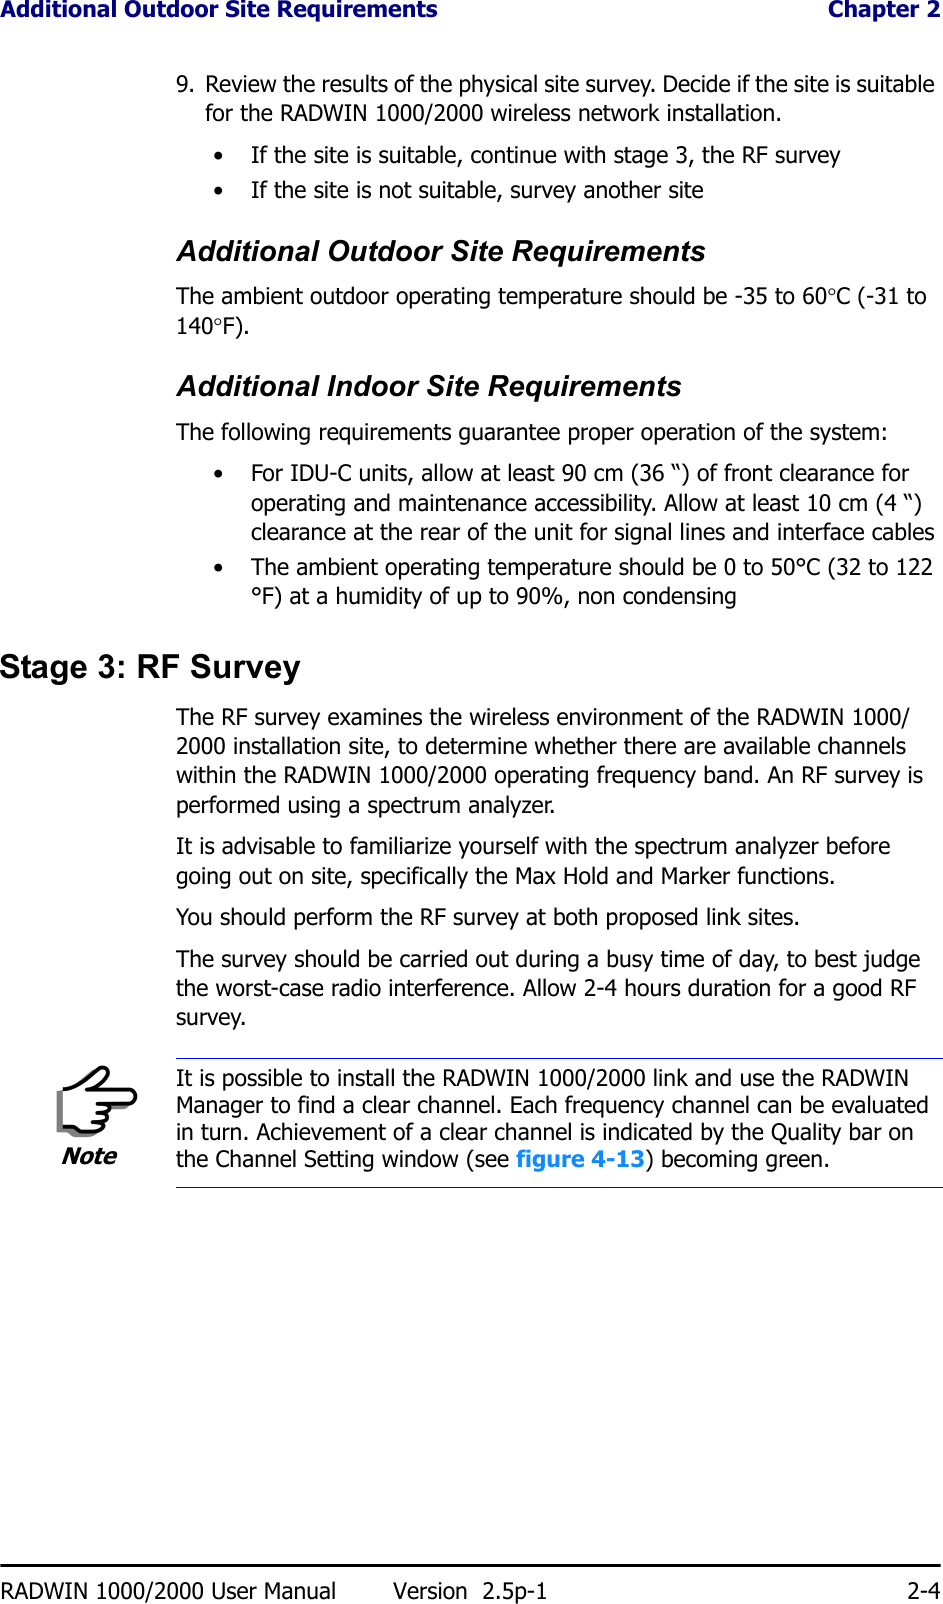 Additional Outdoor Site Requirements  Chapter 2RADWIN 1000/2000 User Manual Version  2.5p-1 2-49. Review the results of the physical site survey. Decide if the site is suitable for the RADWIN 1000/2000 wireless network installation.• If the site is suitable, continue with stage 3, the RF survey• If the site is not suitable, survey another siteAdditional Outdoor Site RequirementsThe ambient outdoor operating temperature should be -35 to 60°C (-31 to 140°F).Additional Indoor Site RequirementsThe following requirements guarantee proper operation of the system:• For IDU-C units, allow at least 90 cm (36 “) of front clearance for operating and maintenance accessibility. Allow at least 10 cm (4 “) clearance at the rear of the unit for signal lines and interface cables• The ambient operating temperature should be 0 to 50°C (32 to 122 °F) at a humidity of up to 90%, non condensingStage 3: RF SurveyThe RF survey examines the wireless environment of the RADWIN 1000/2000 installation site, to determine whether there are available channels within the RADWIN 1000/2000 operating frequency band. An RF survey is performed using a spectrum analyzer.It is advisable to familiarize yourself with the spectrum analyzer before going out on site, specifically the Max Hold and Marker functions.You should perform the RF survey at both proposed link sites.The survey should be carried out during a busy time of day, to best judge the worst-case radio interference. Allow 2-4 hours duration for a good RF survey.NoteIt is possible to install the RADWIN 1000/2000 link and use the RADWIN Manager to find a clear channel. Each frequency channel can be evaluated in turn. Achievement of a clear channel is indicated by the Quality bar on the Channel Setting window (see figure 4-13) becoming green.